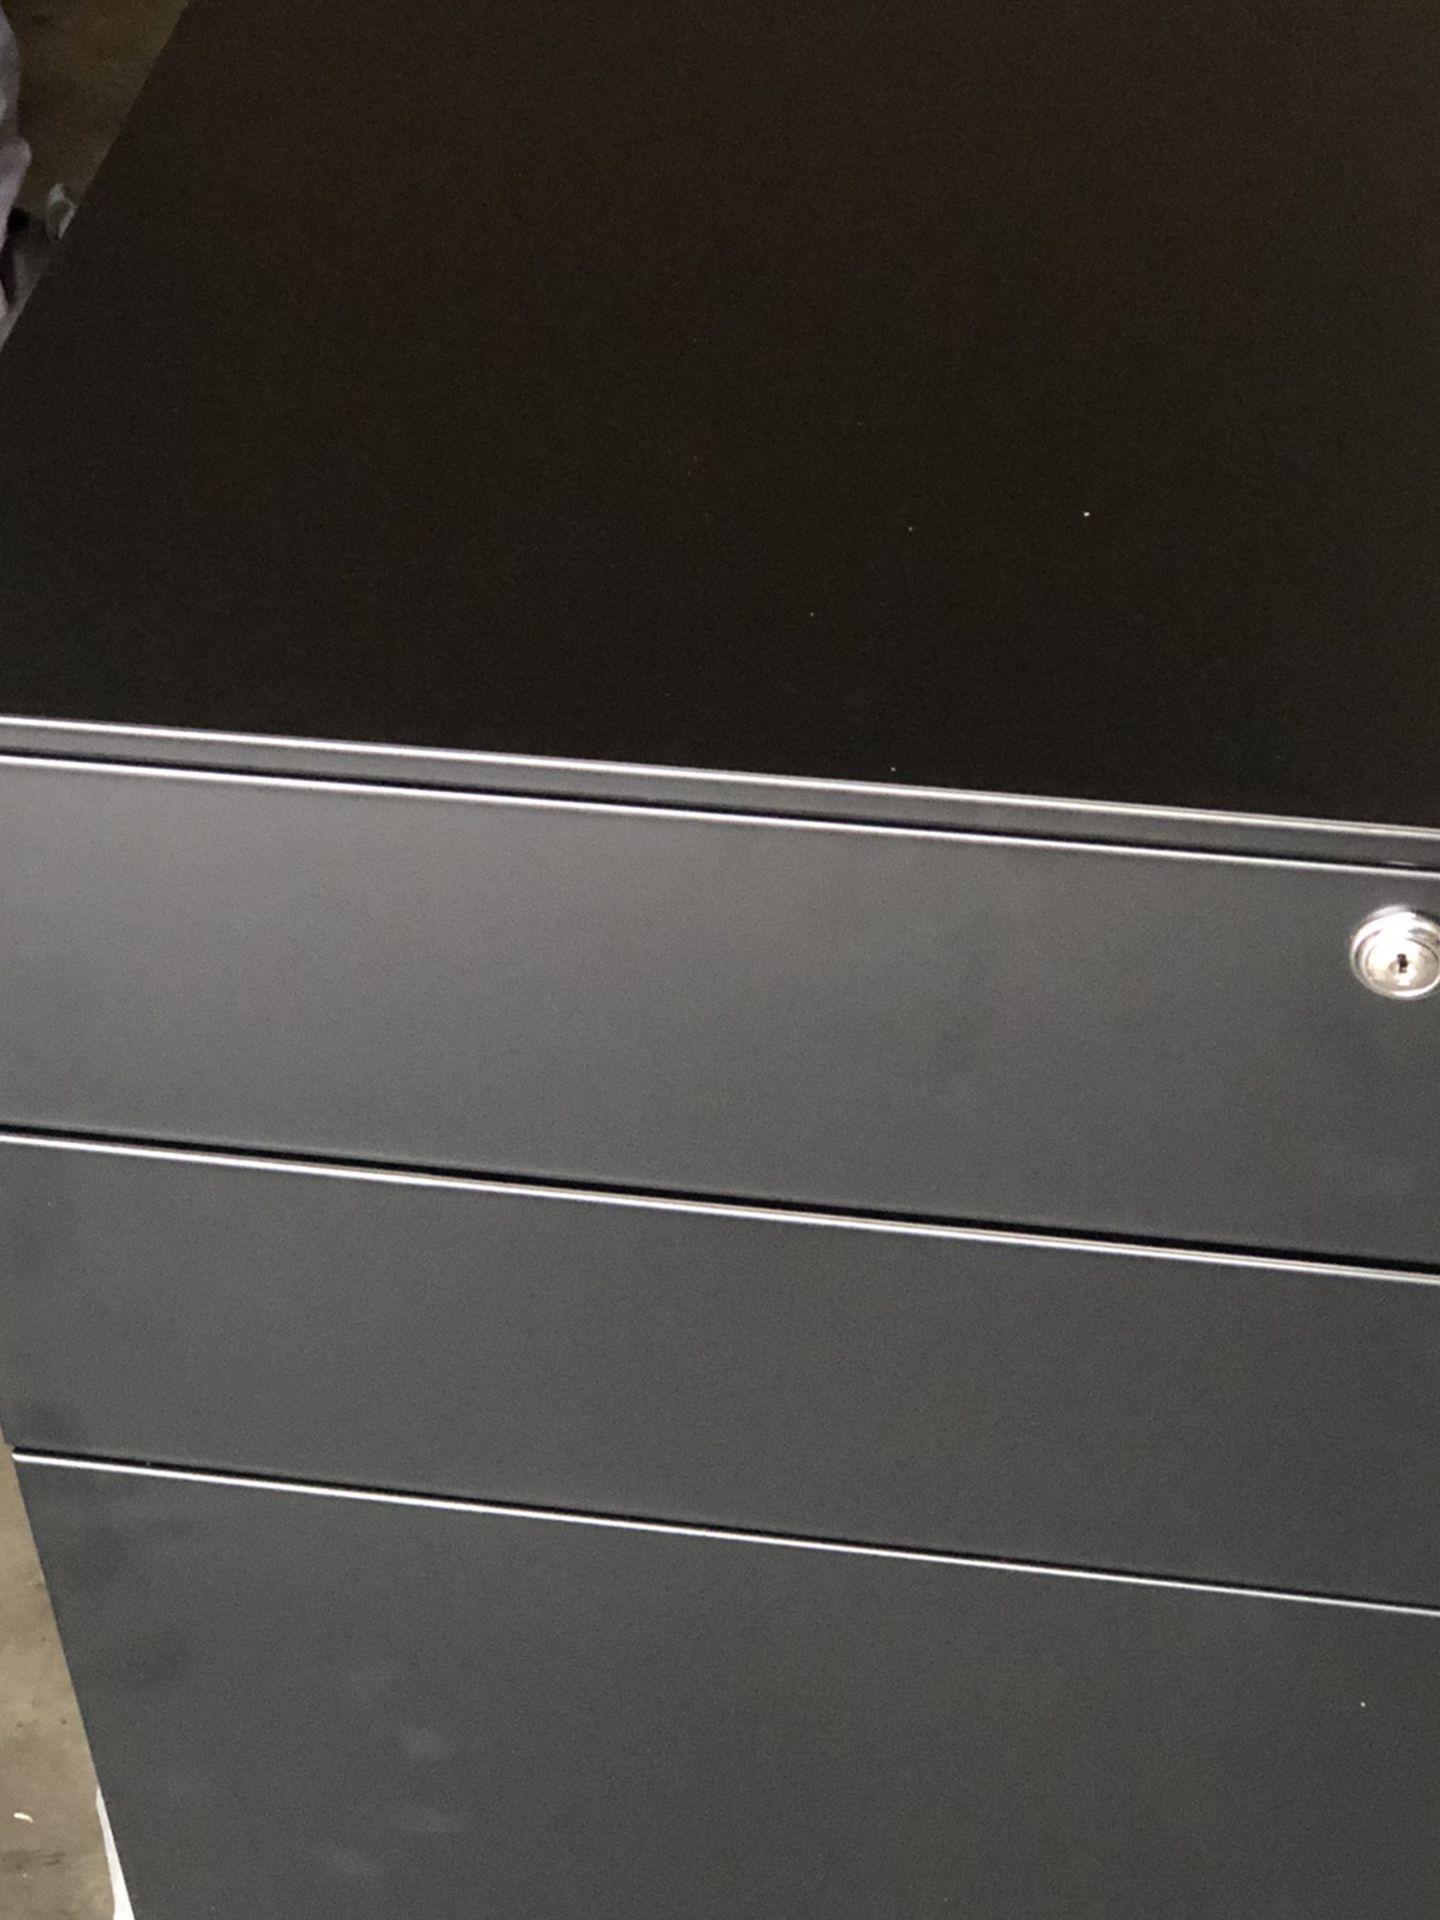 Black Filing Cabinet 3 Drawer Metal File Cabinet with Lock, Locking Filing Cabinets for Office Home, Rolling Mobile File Cabinets for Legal Letter on